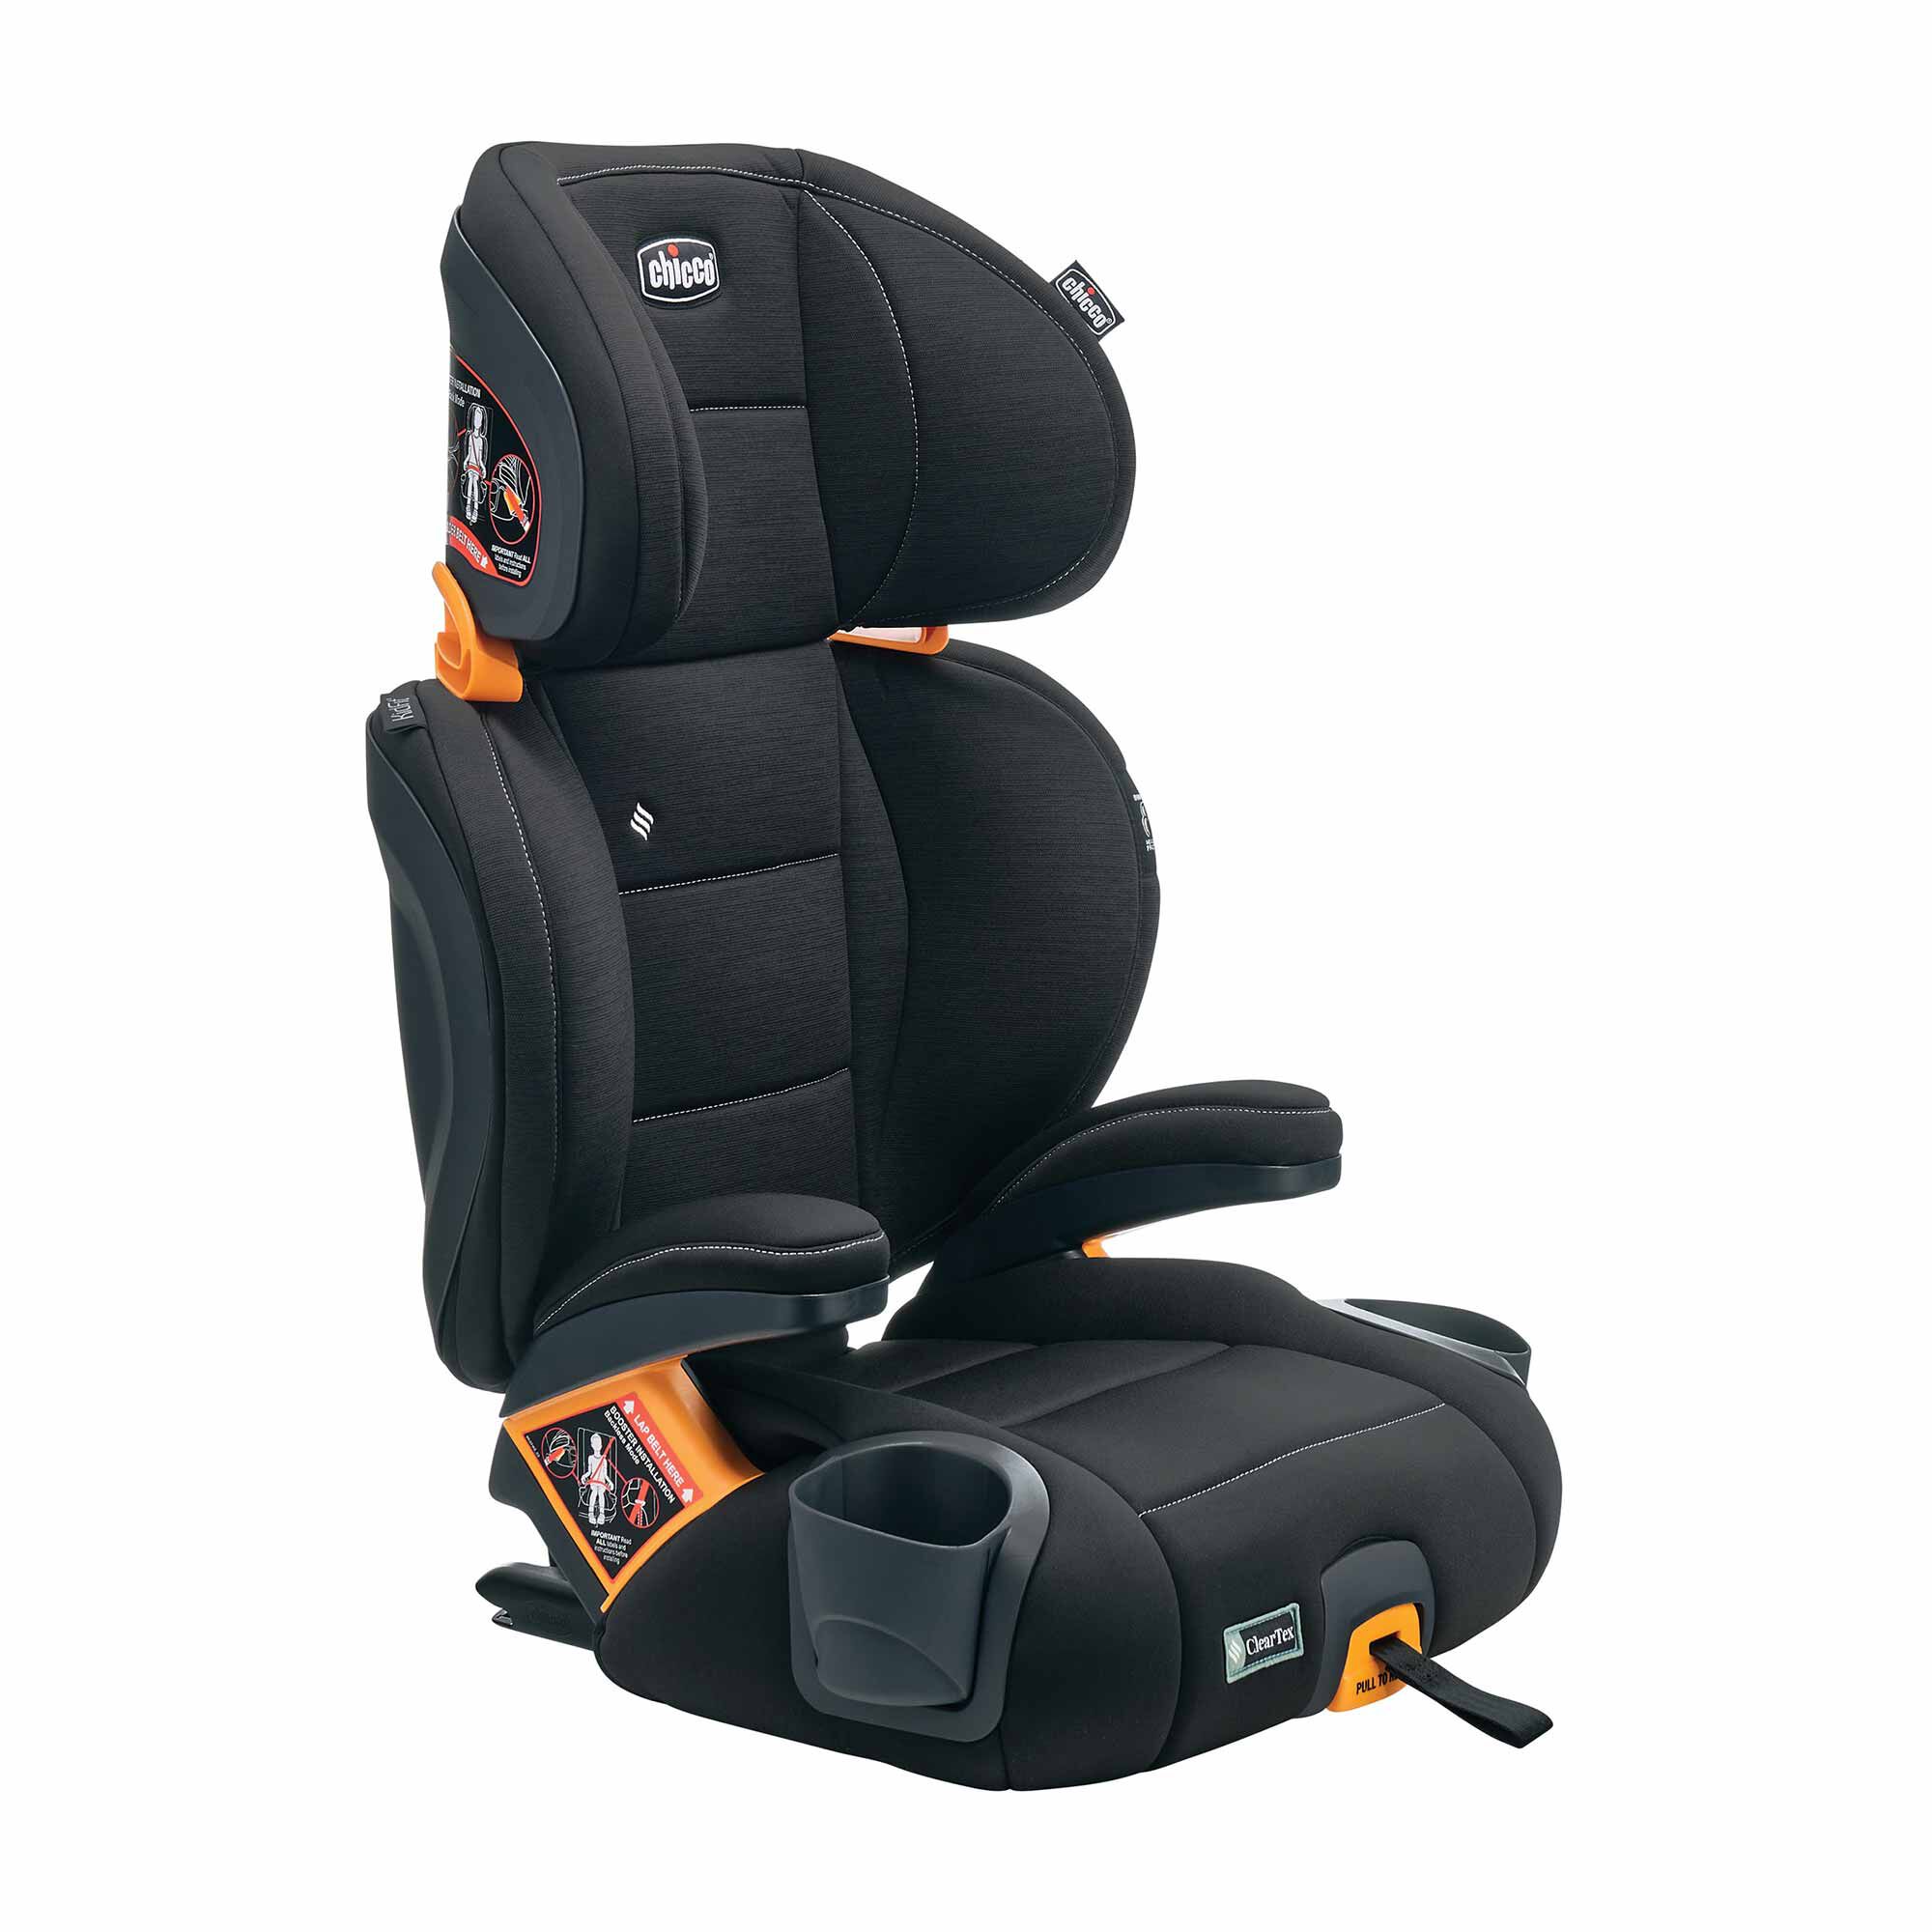 KidFit ClearTex Plus 2-in-1 Belt-Positioning Booster Car Seat 